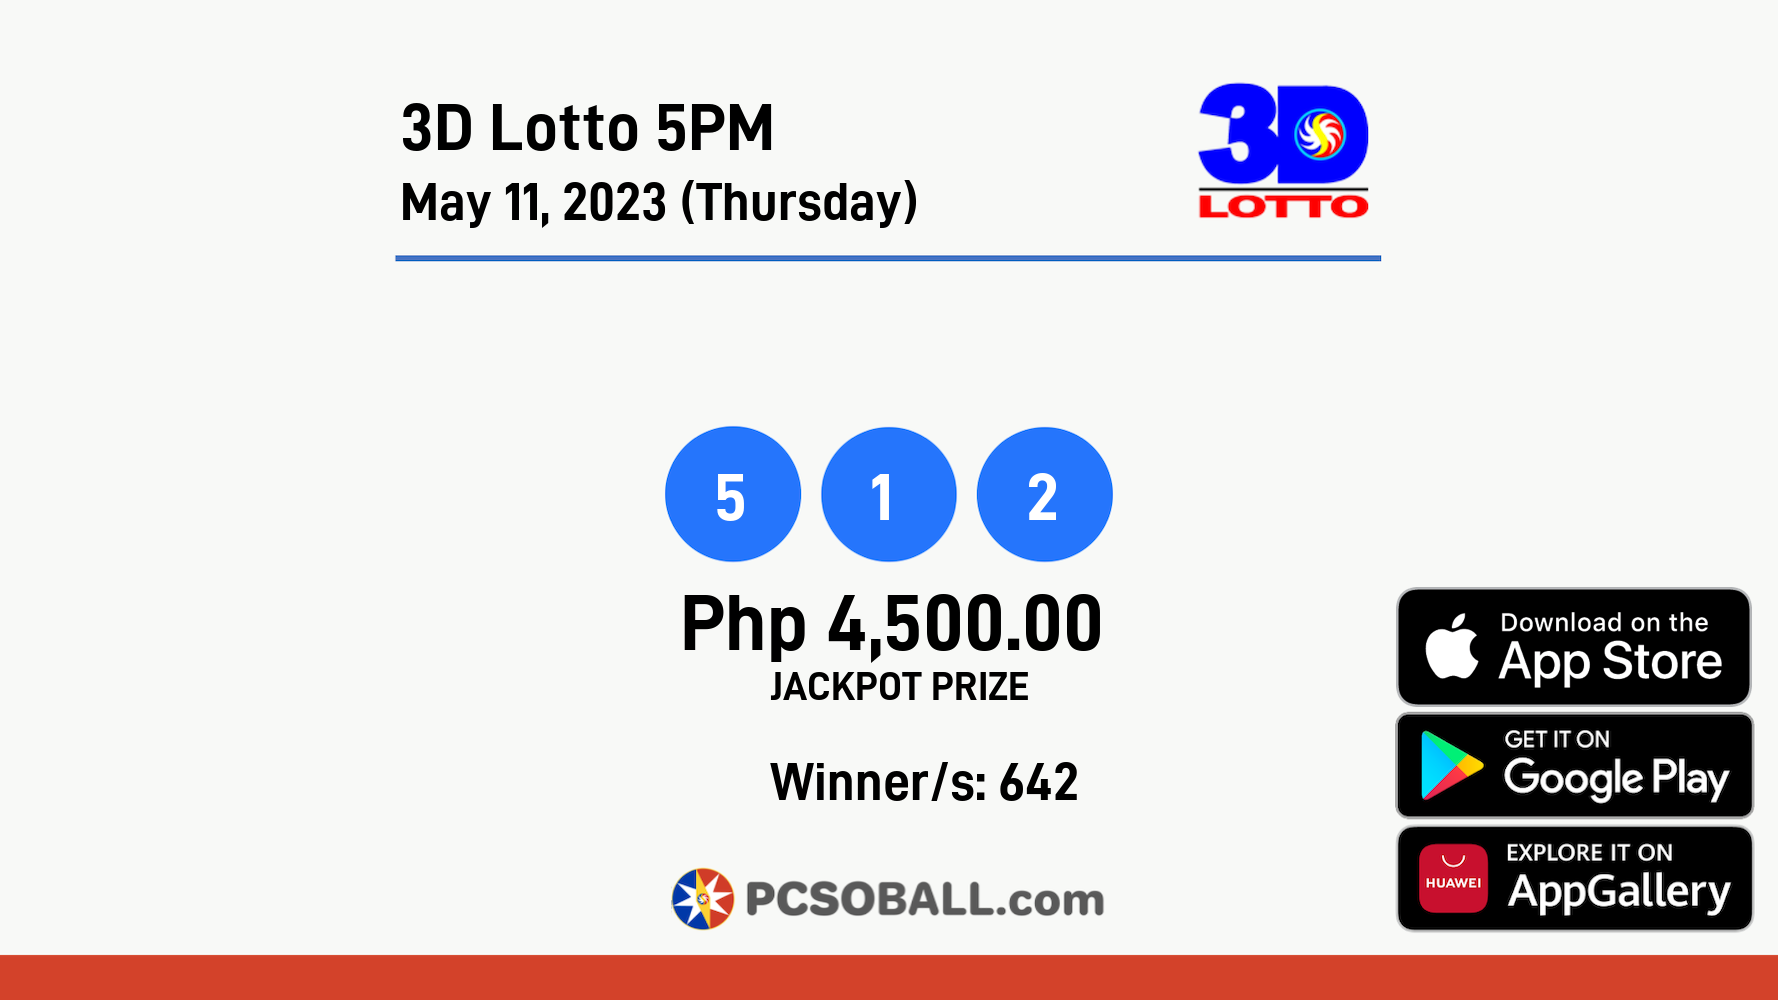 3D Lotto 5PM May 11, 2023 (Thursday) Result